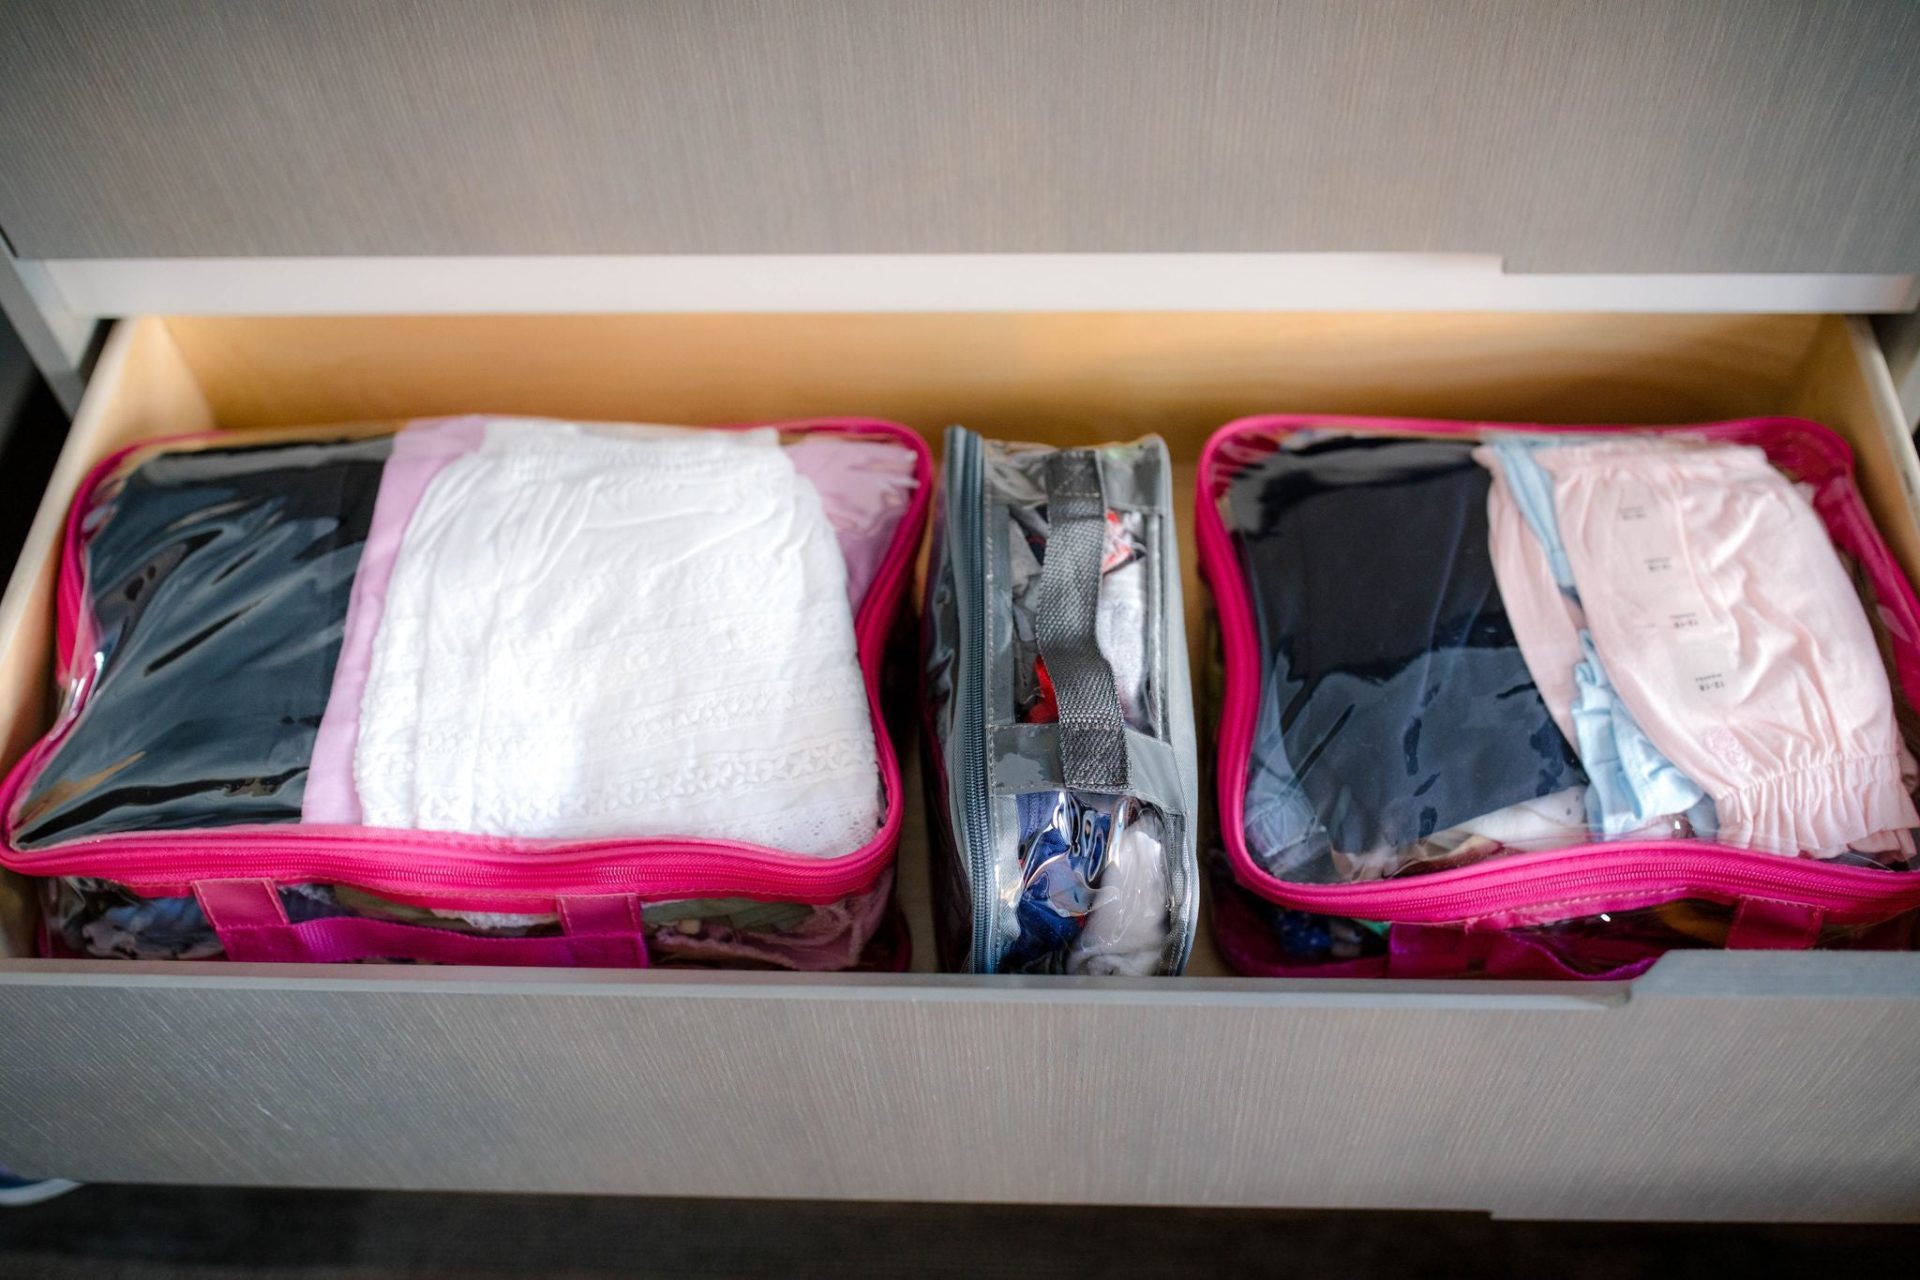 Packing cubes as traveling drawers